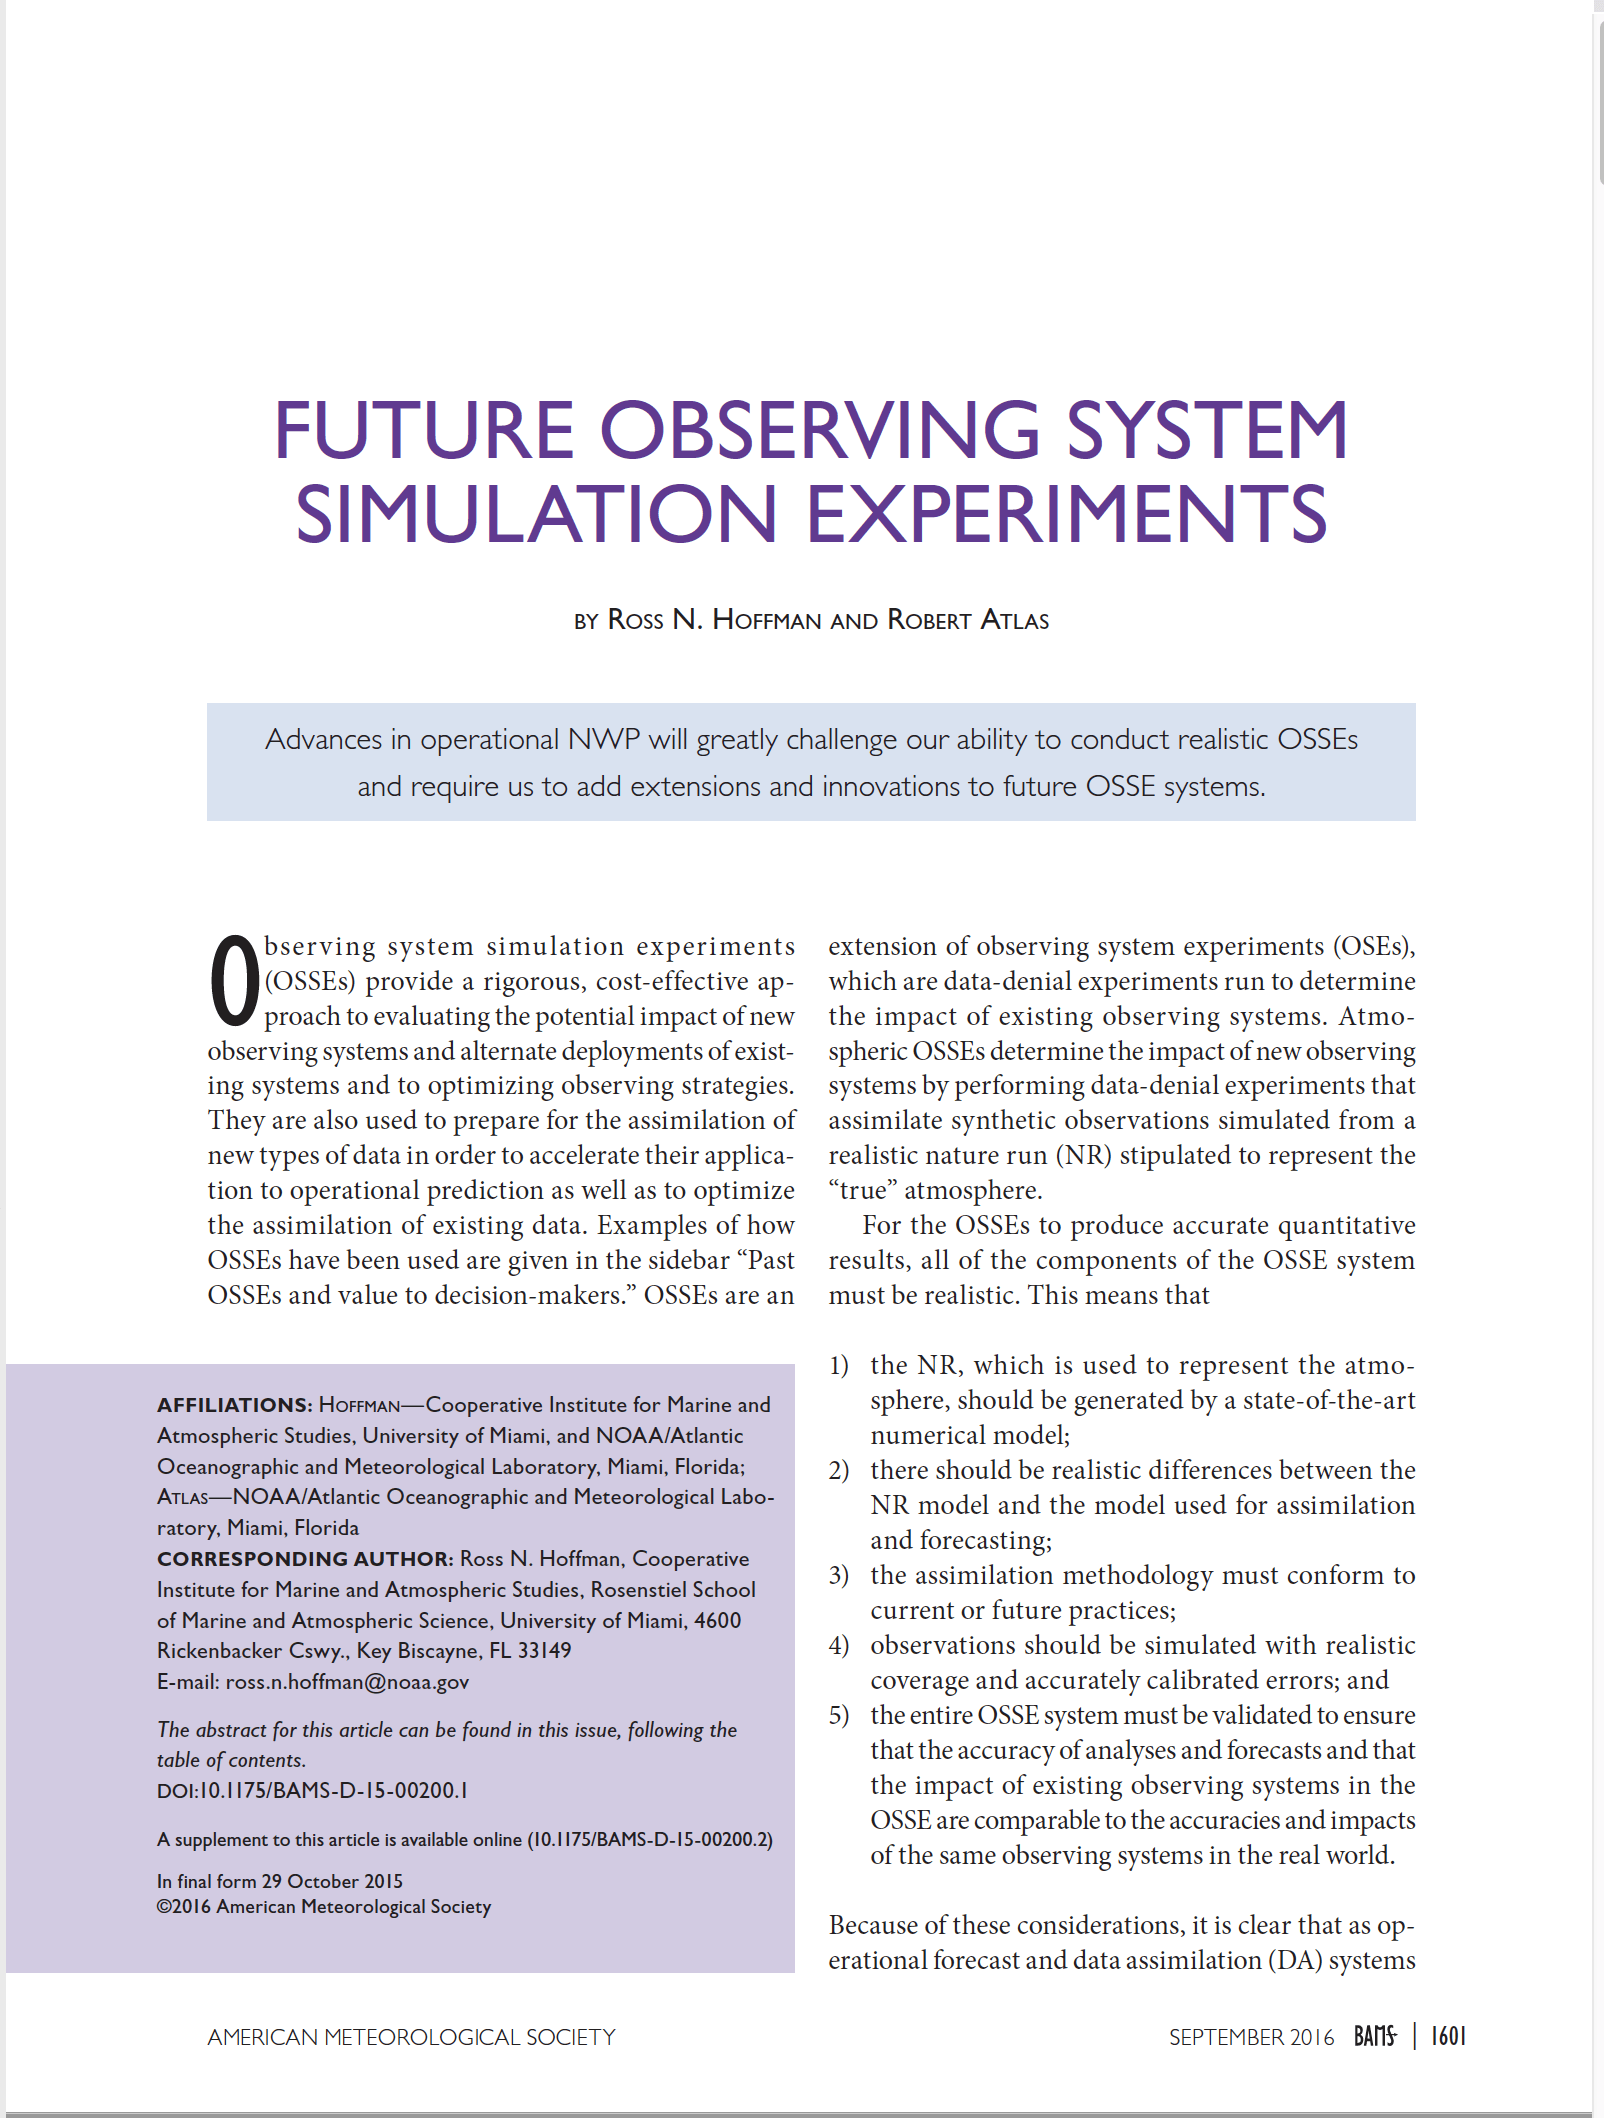 Image of paper "Future Observing System Simulation Experiments"